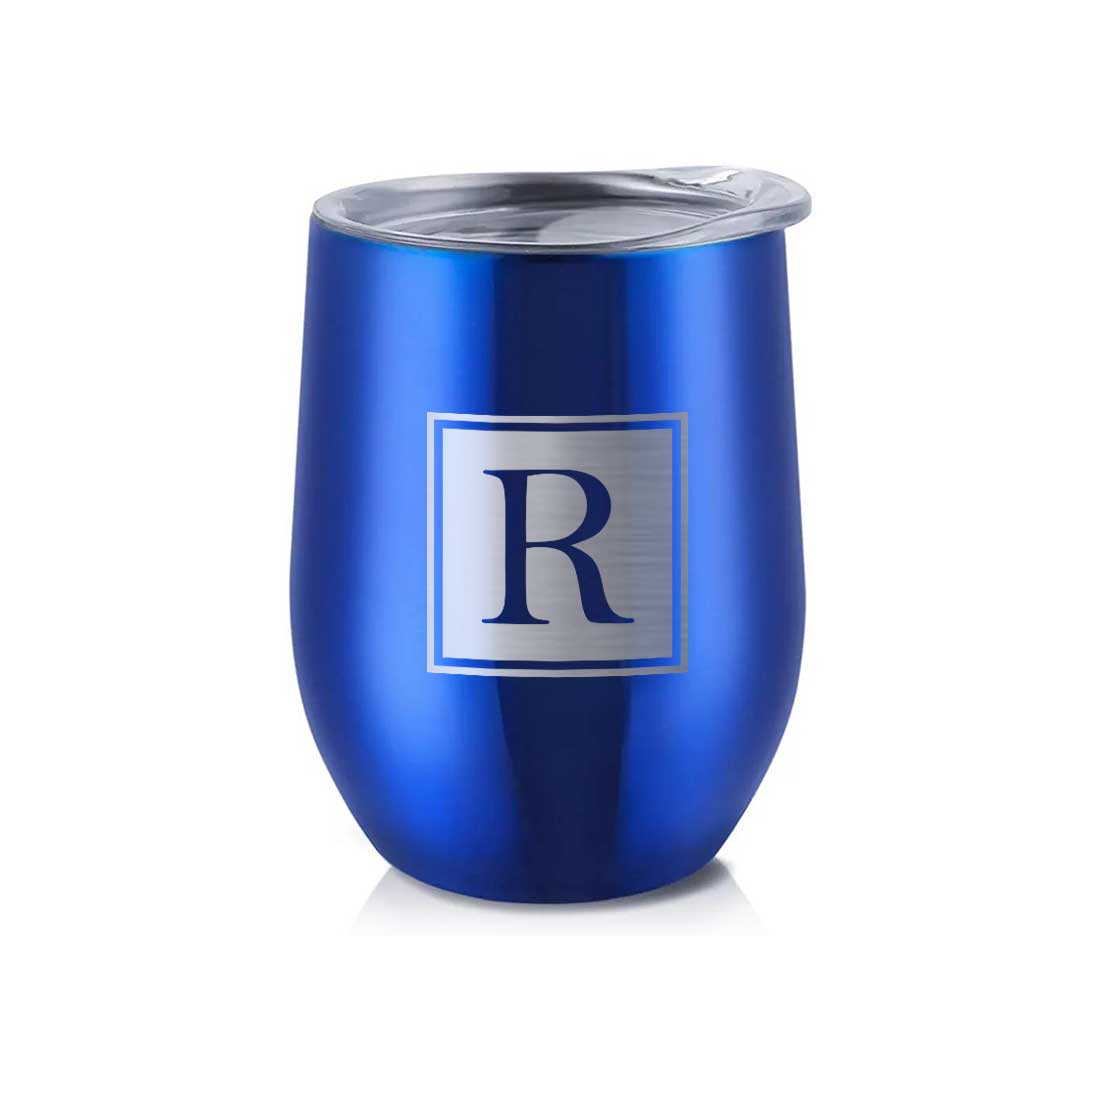 Personalised Small Coffee Tumbler for Travelling Engraved Stainless Steel Mug (350 ML) - Monogram